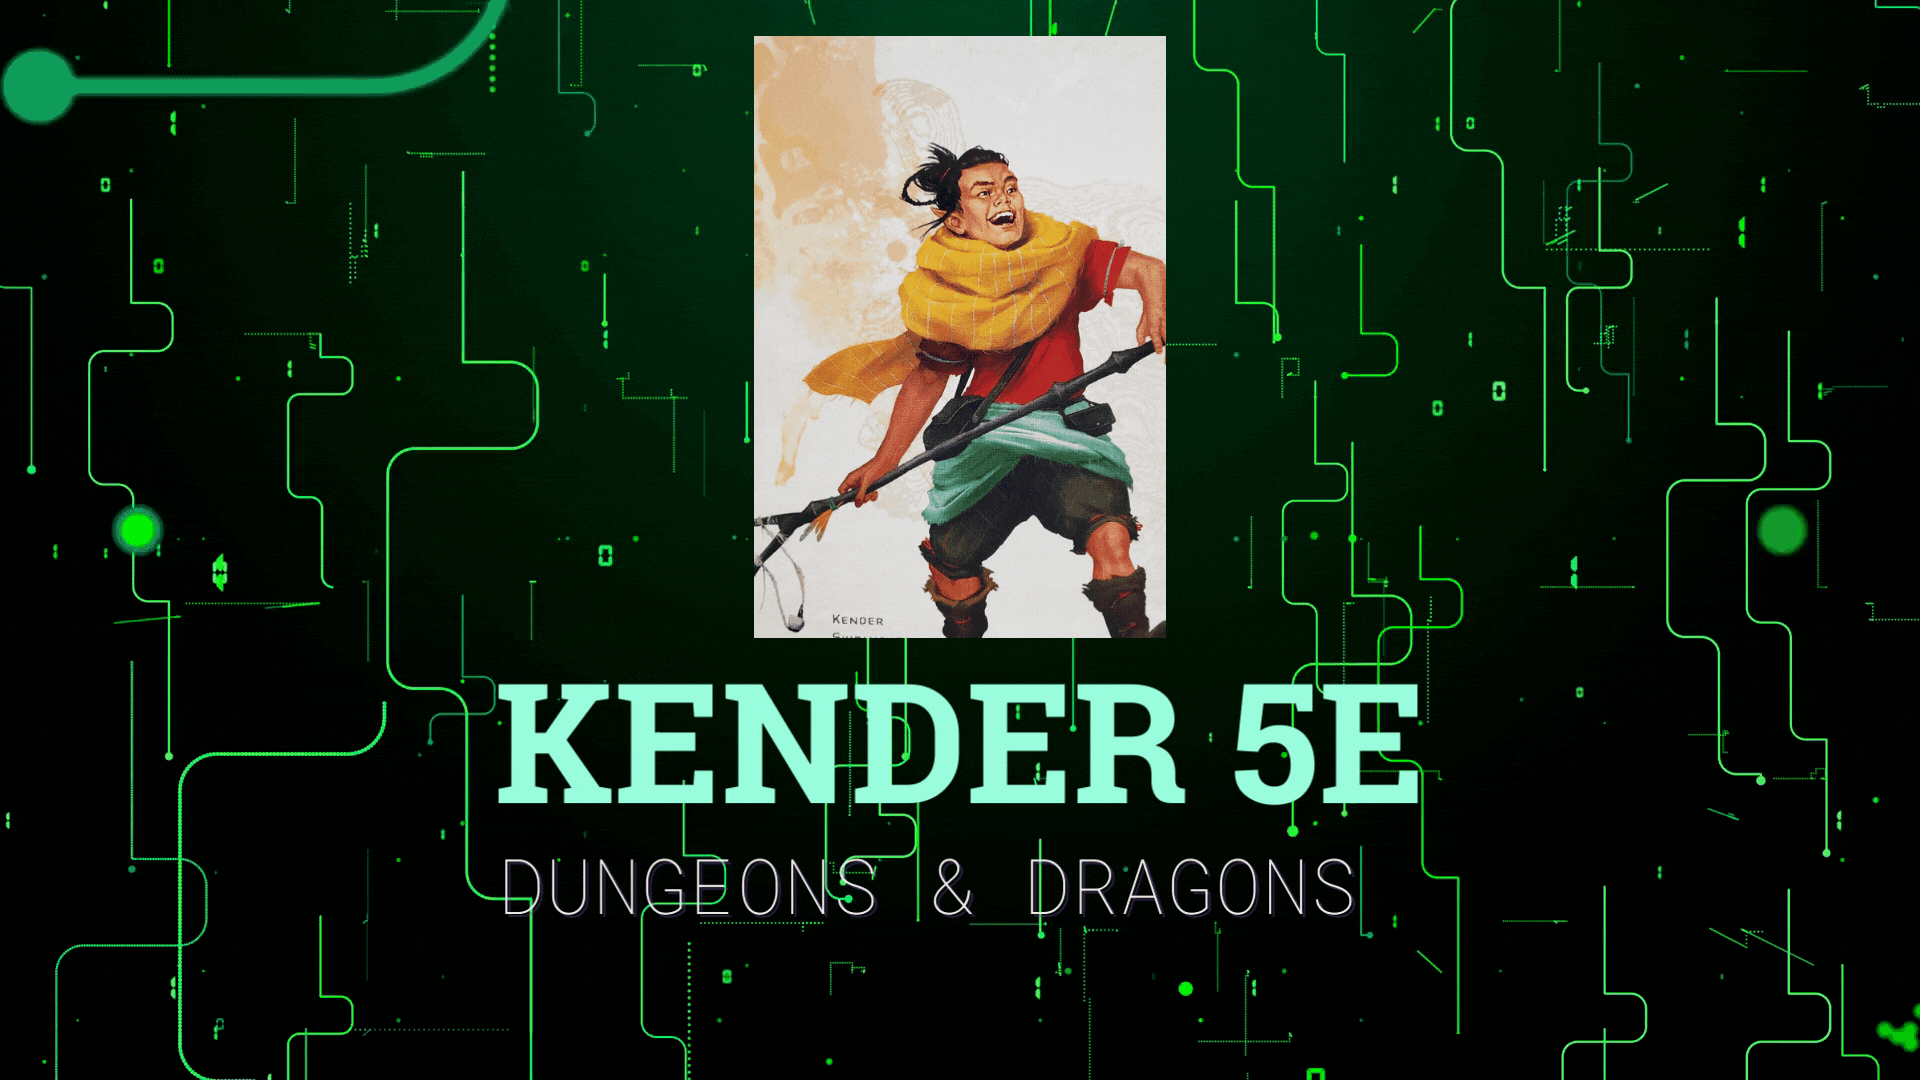 Kender 5e (5th edition) race in dnd races